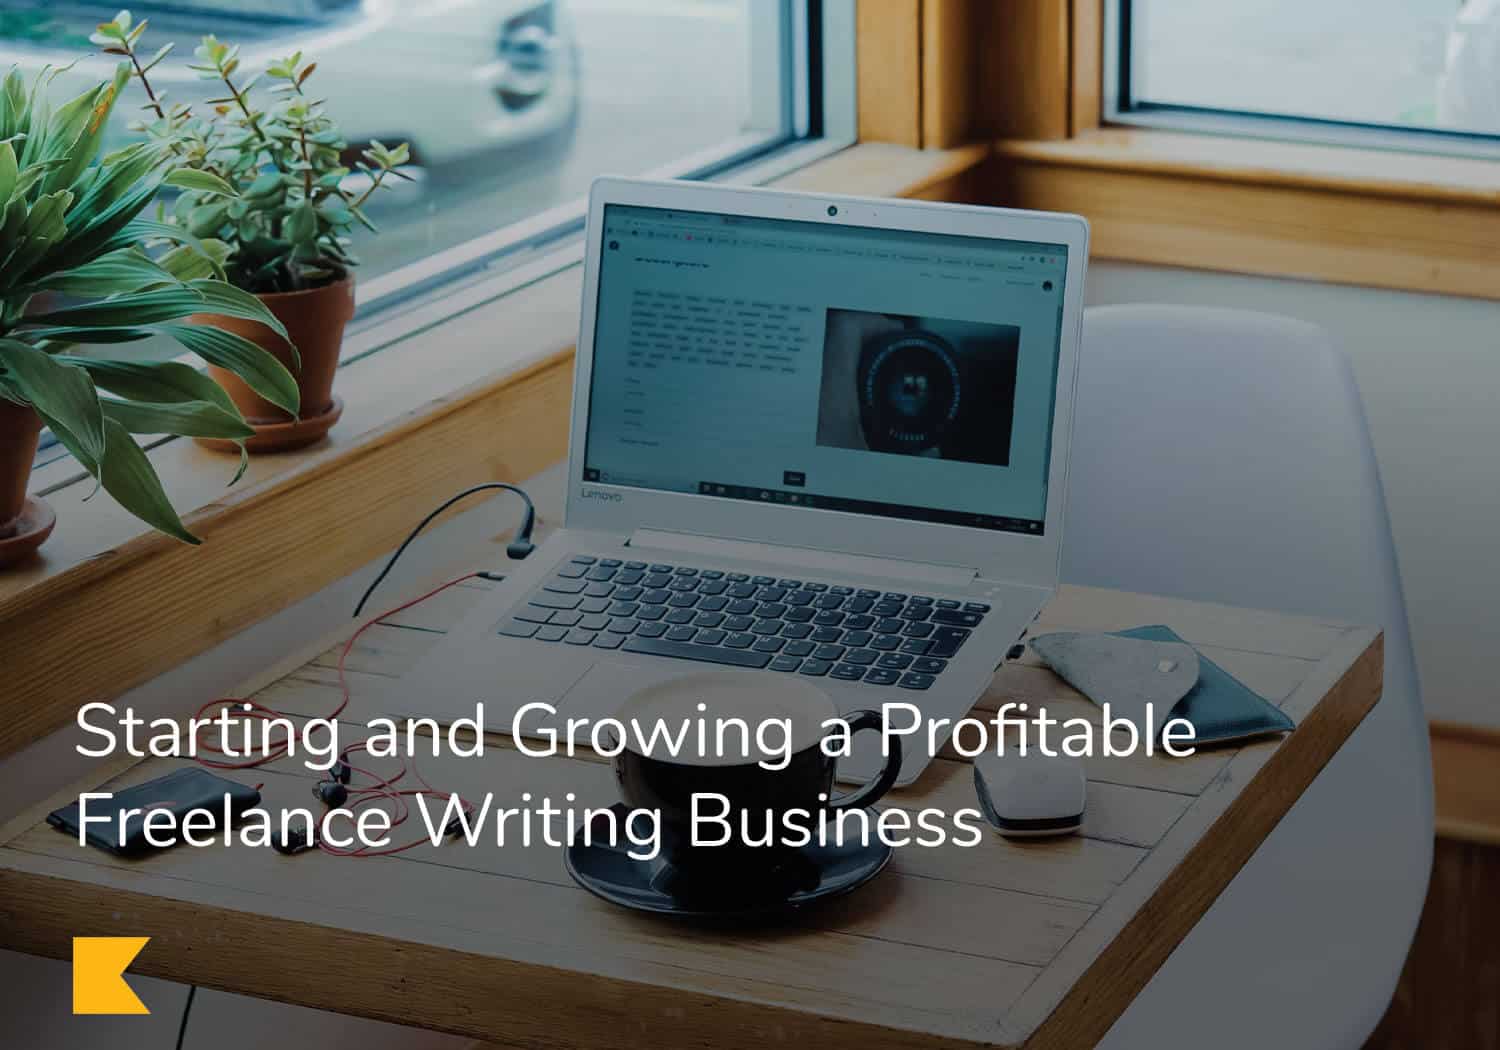 Starting and Growing a Profitable Freelance Writing Business